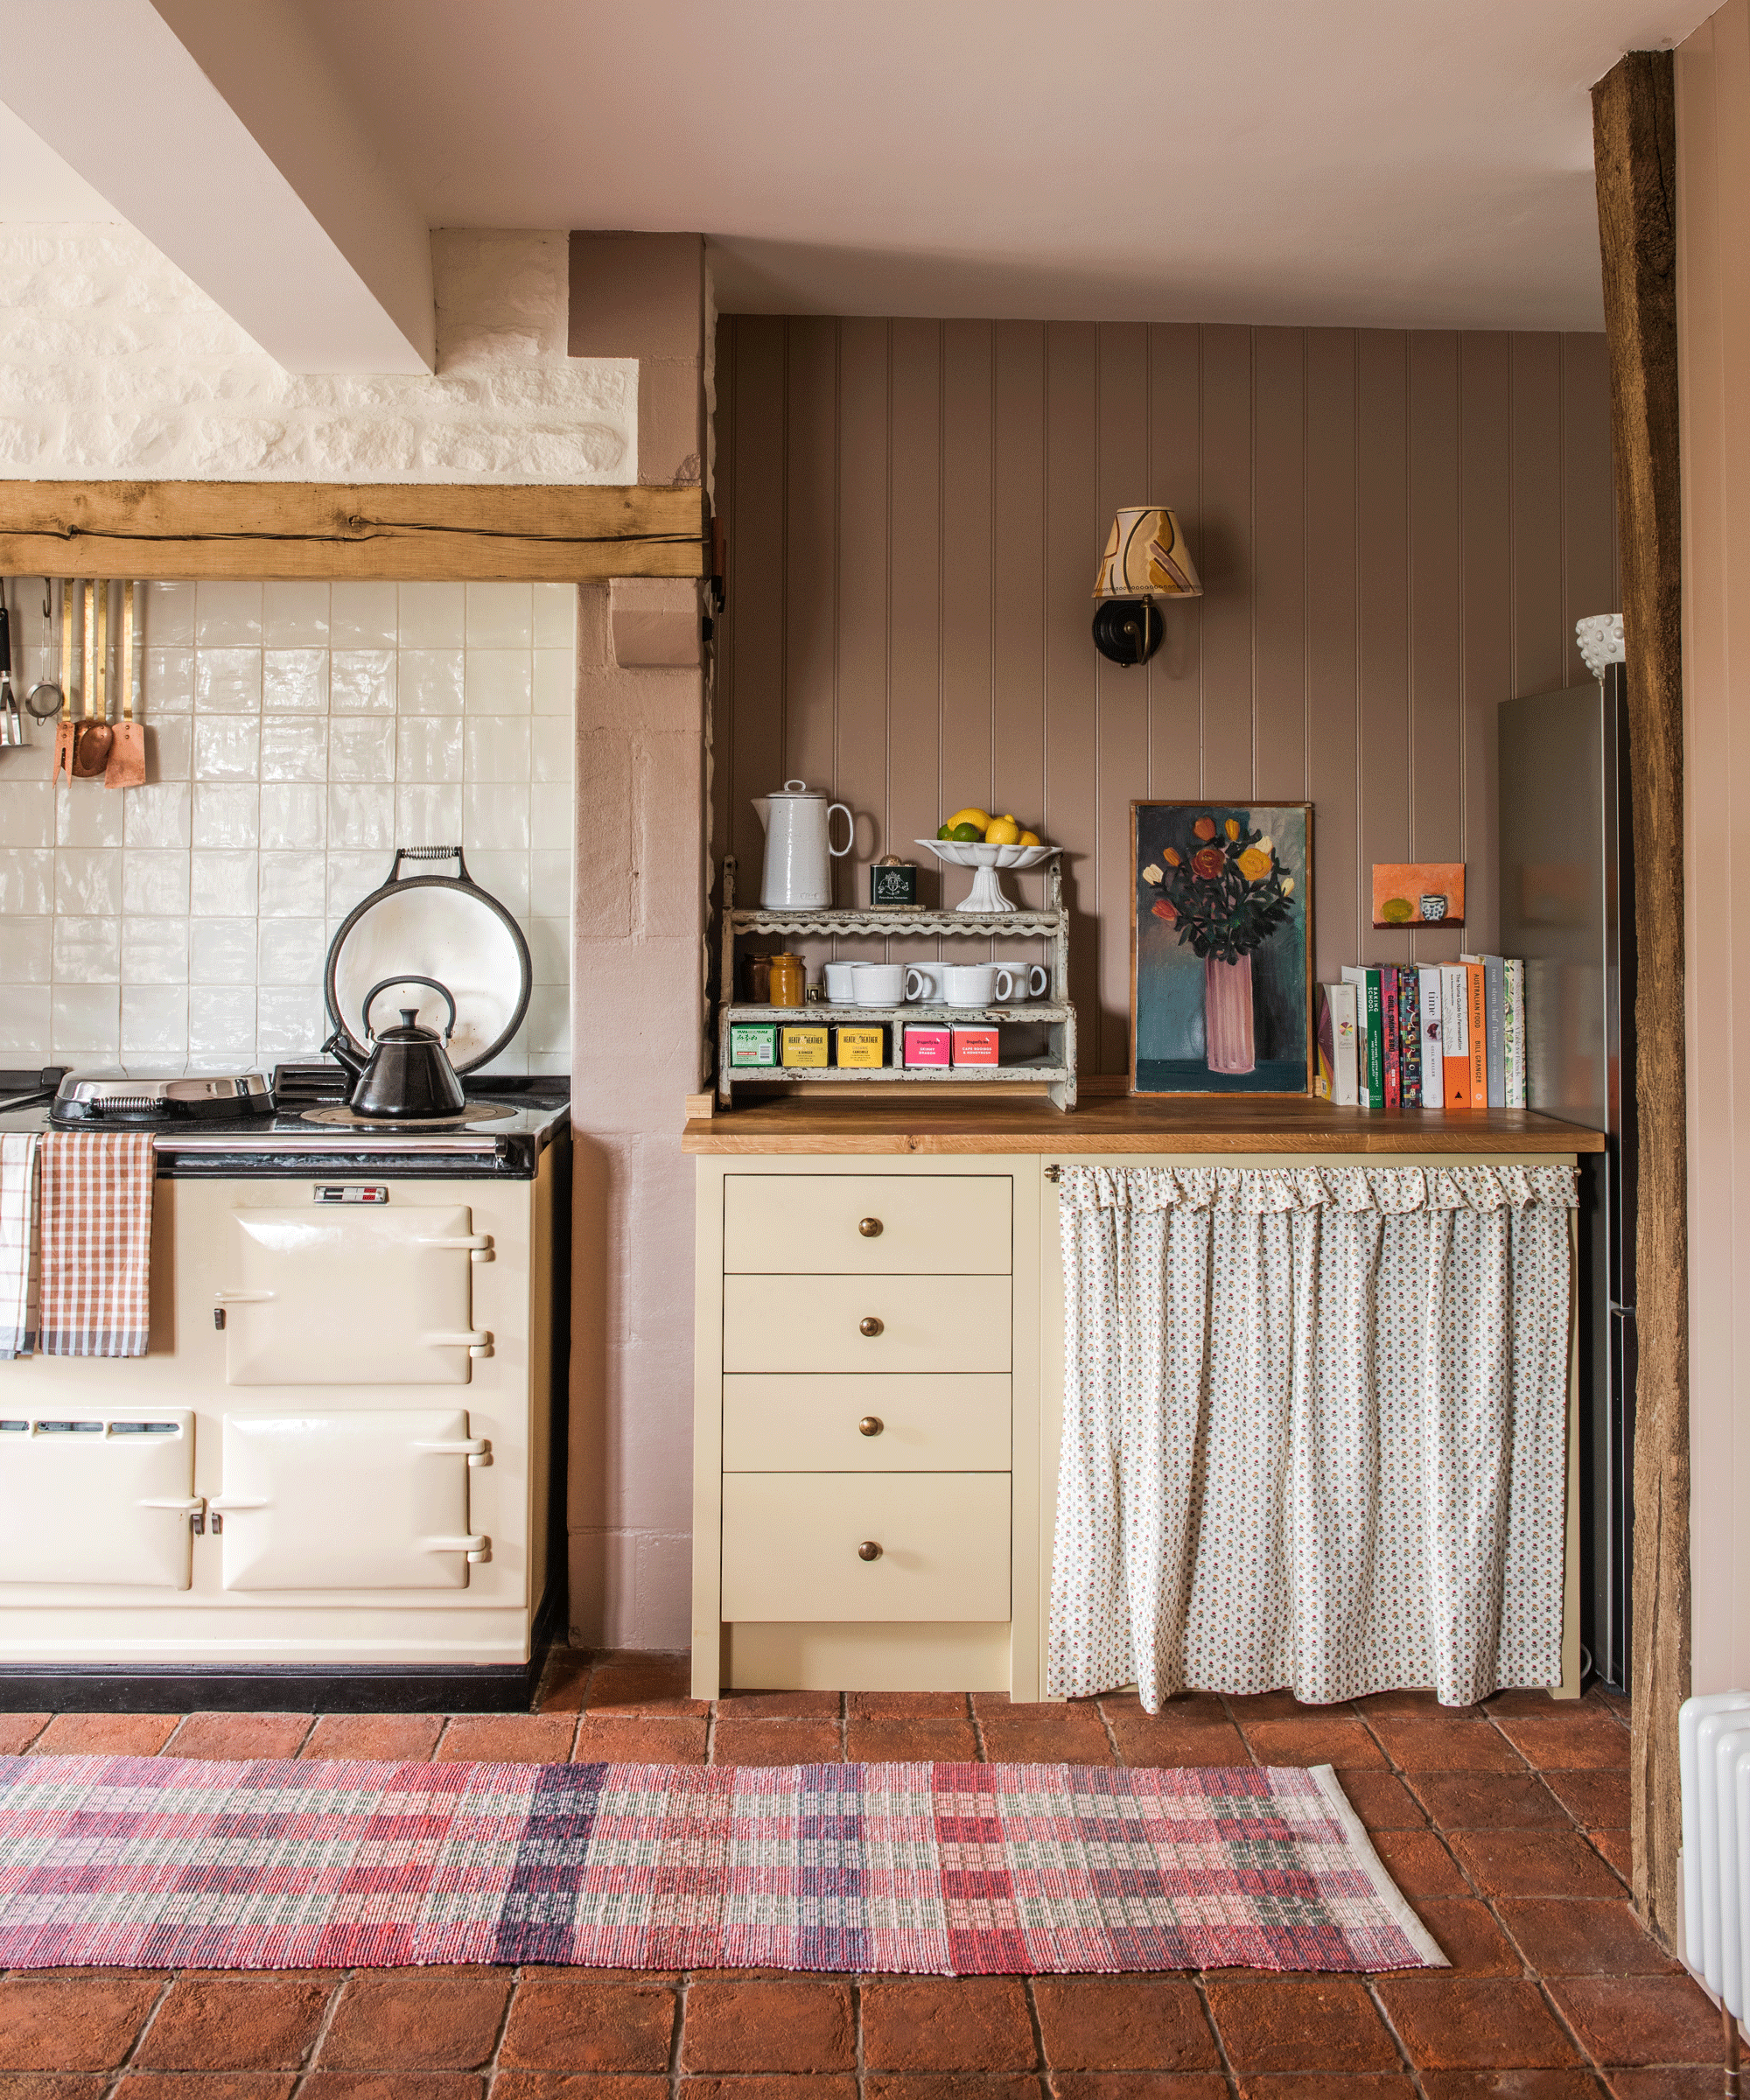 Vintage style kitchen with colourful rug and pink walls